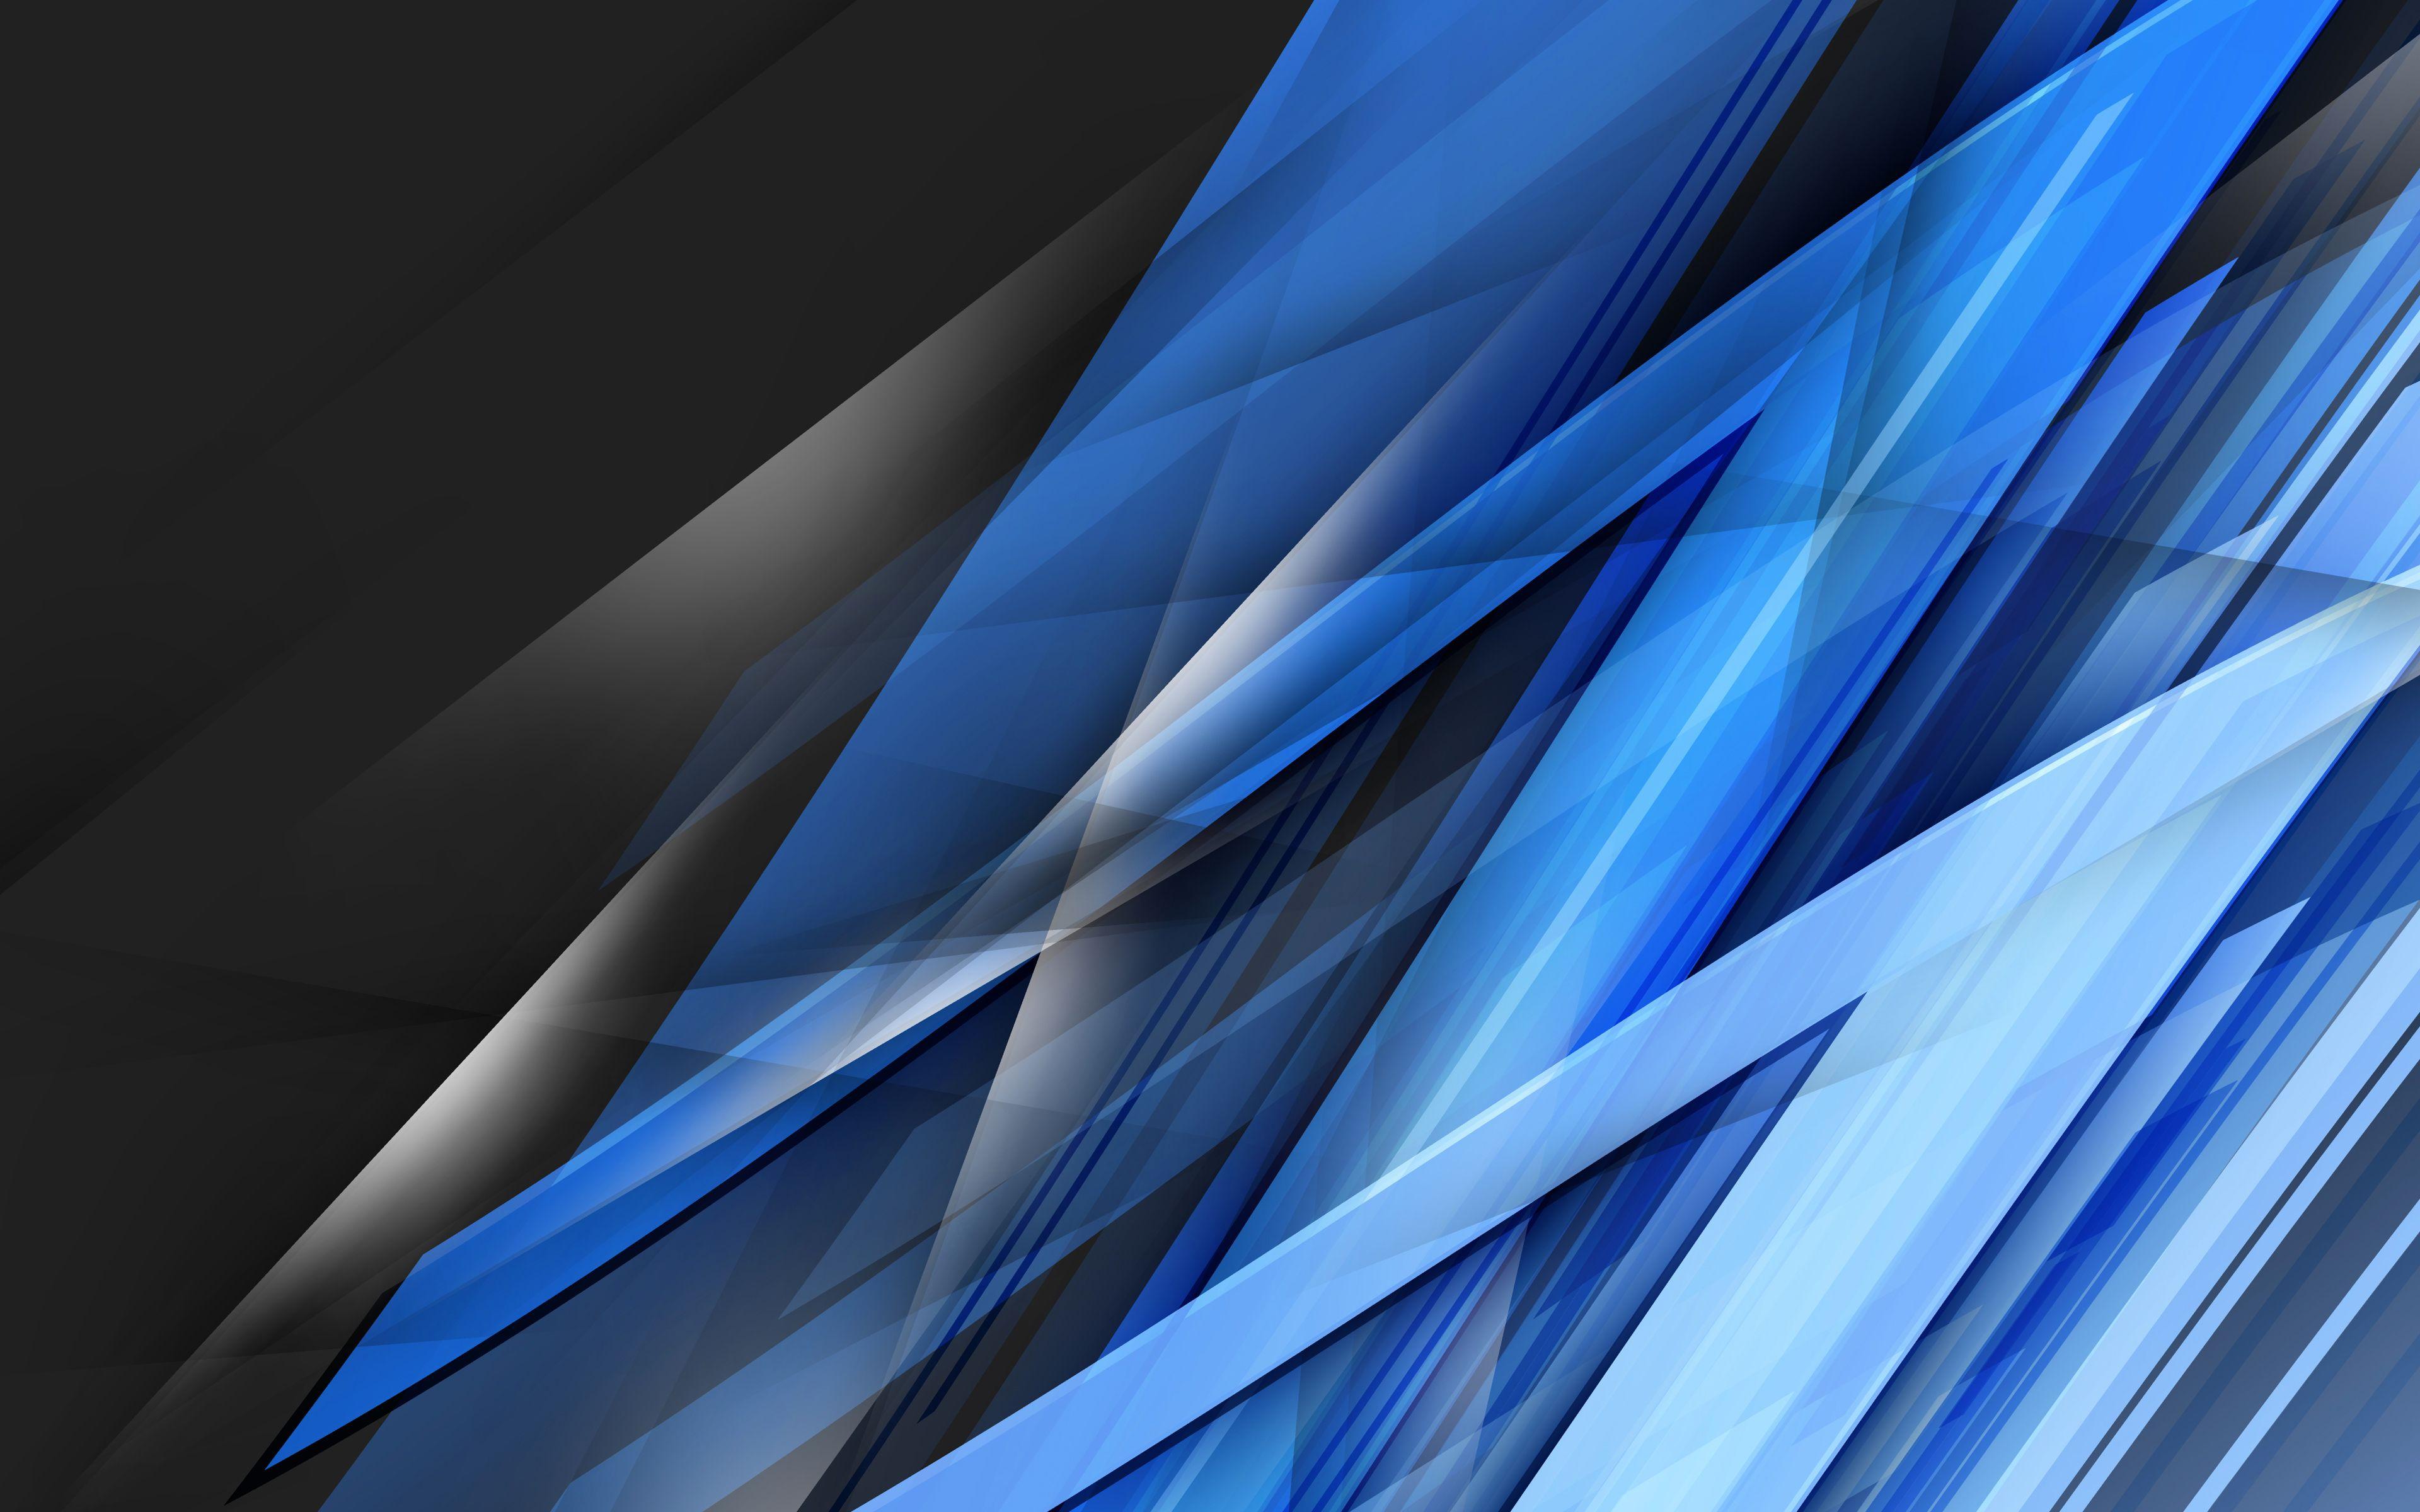 Download wallpaper blue shards, 4k, lines, dark background, art, abstract material for desktop with resolution 3840x2400. High Quality HD picture wallpaper